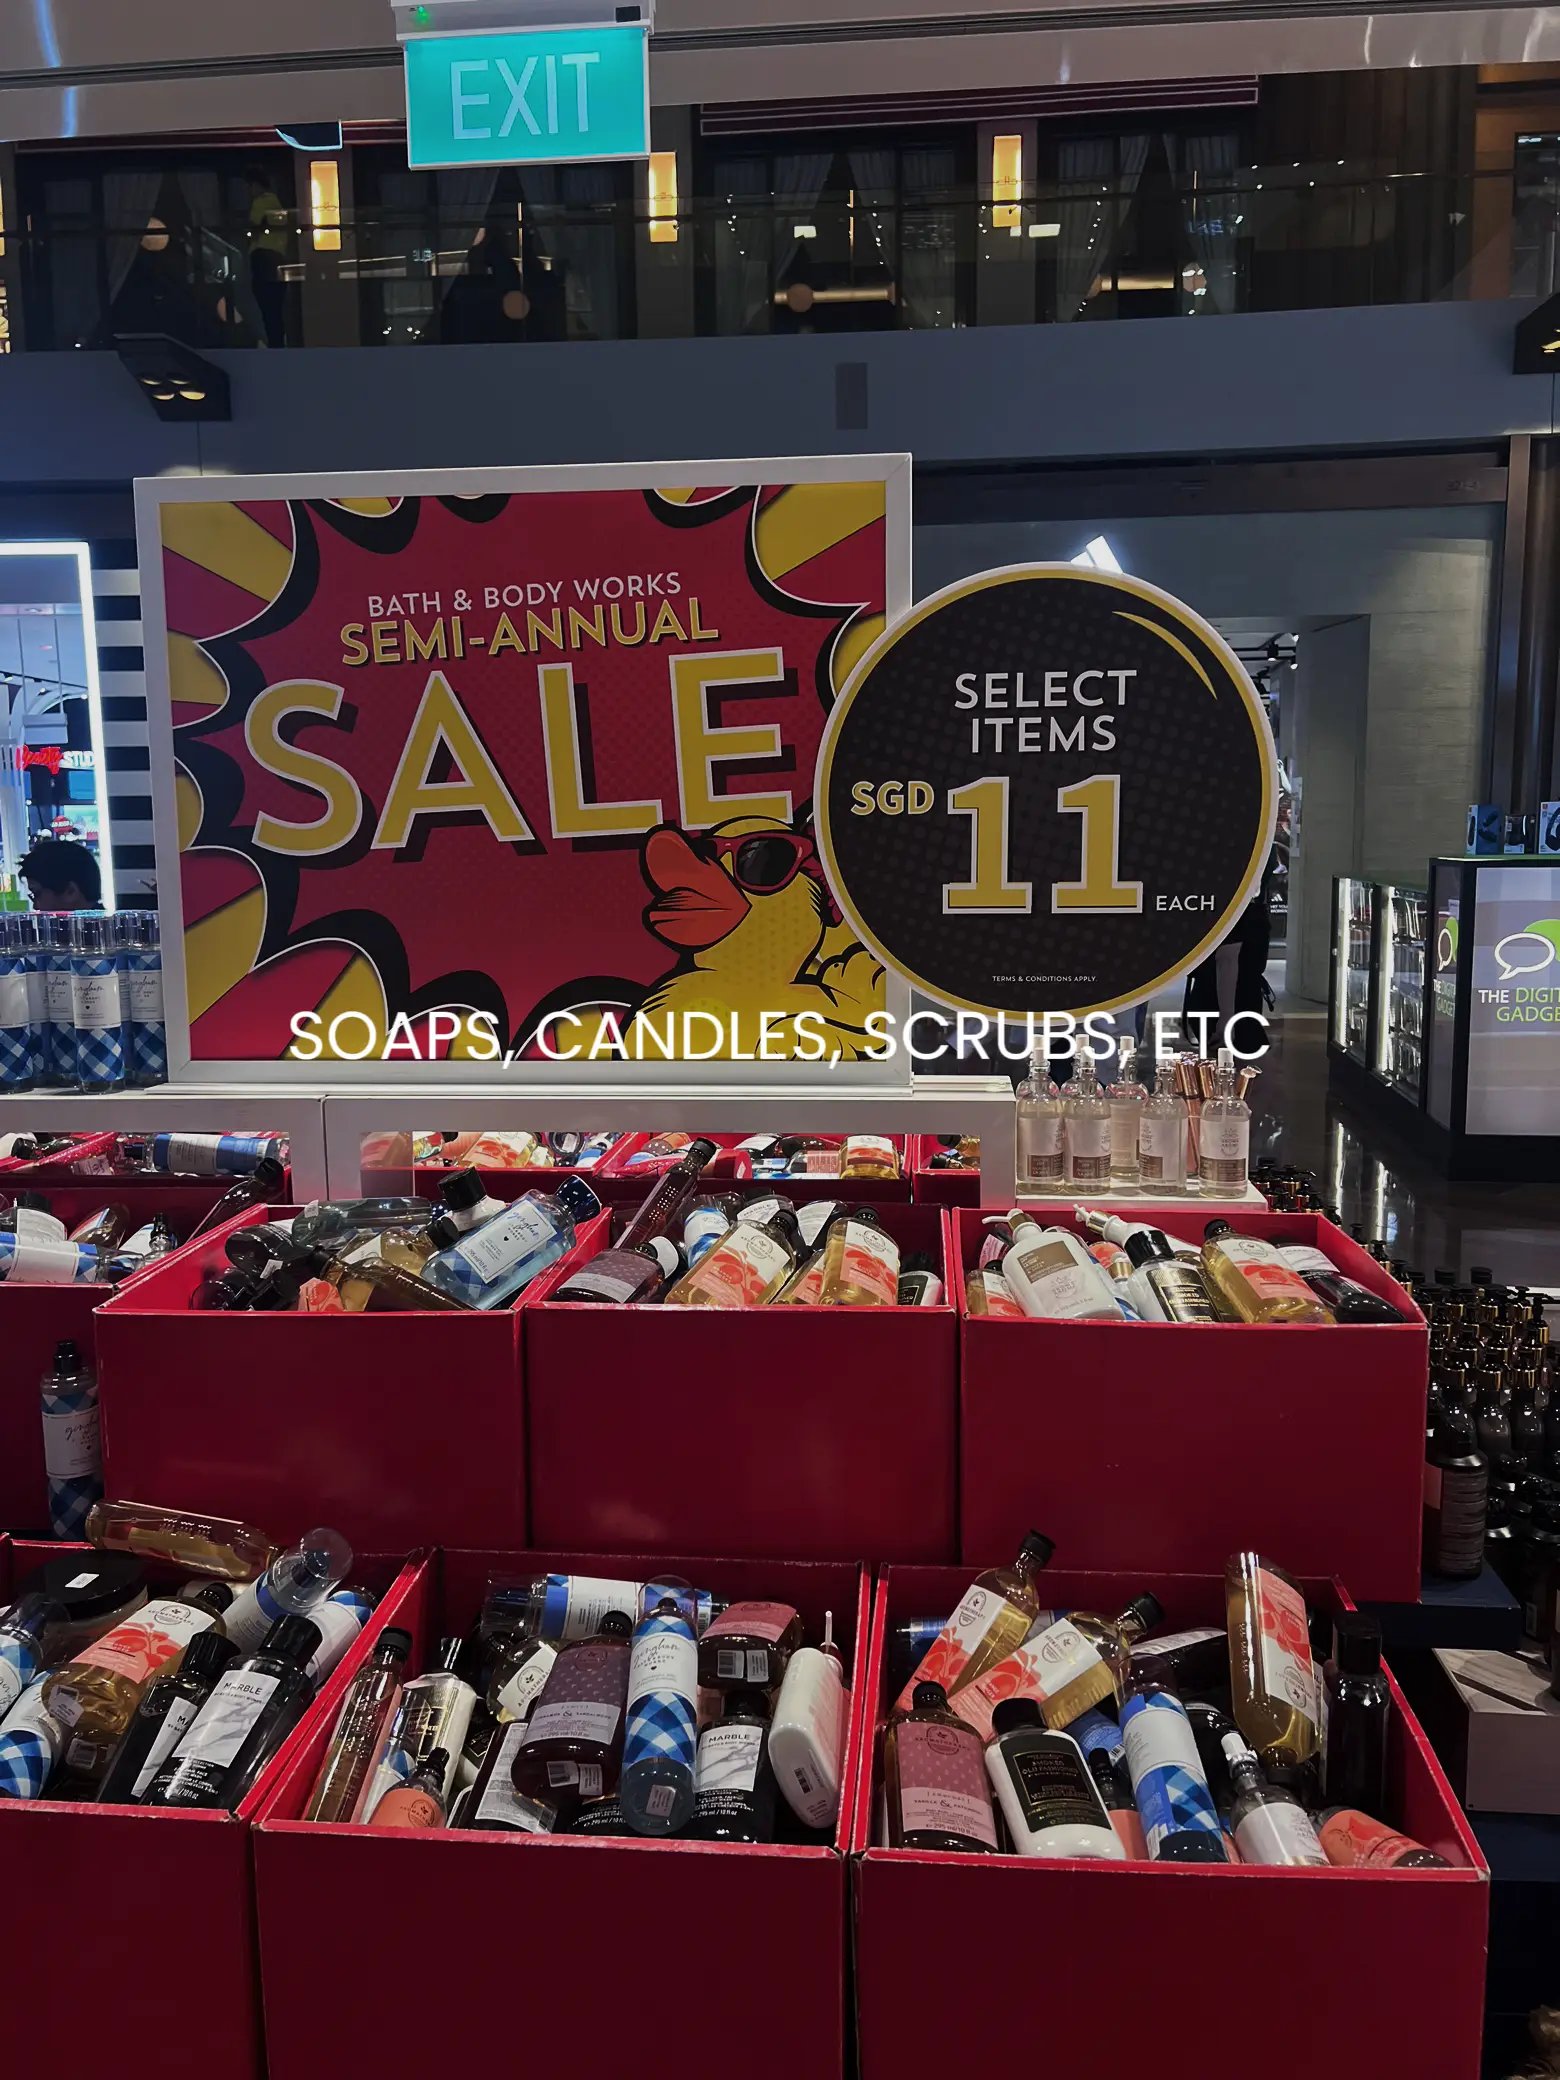 crazy 85% off sale at Bath&BodyWorks, Gallery posted by alex